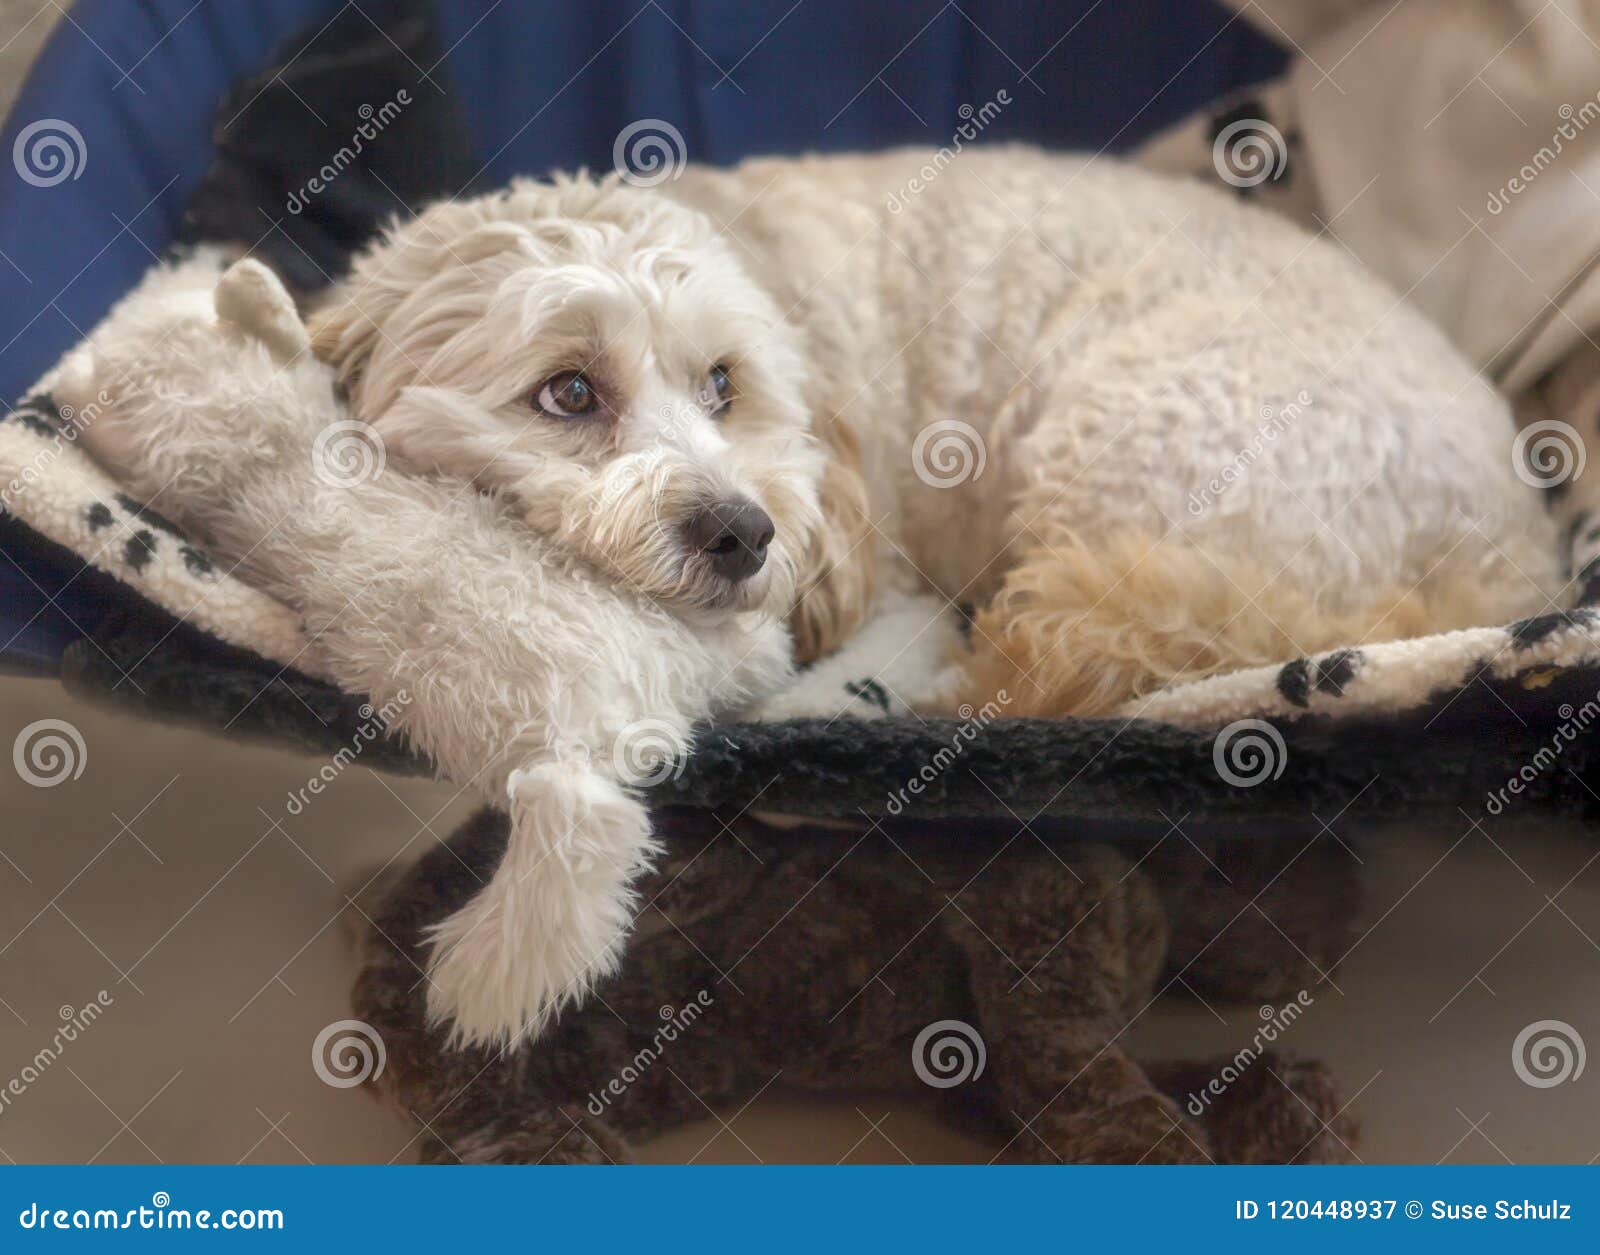 Maltese-Poodle Mix Maltipoo Puppy Dog Soft Toys Stock Image - of canine, resting: 120448937